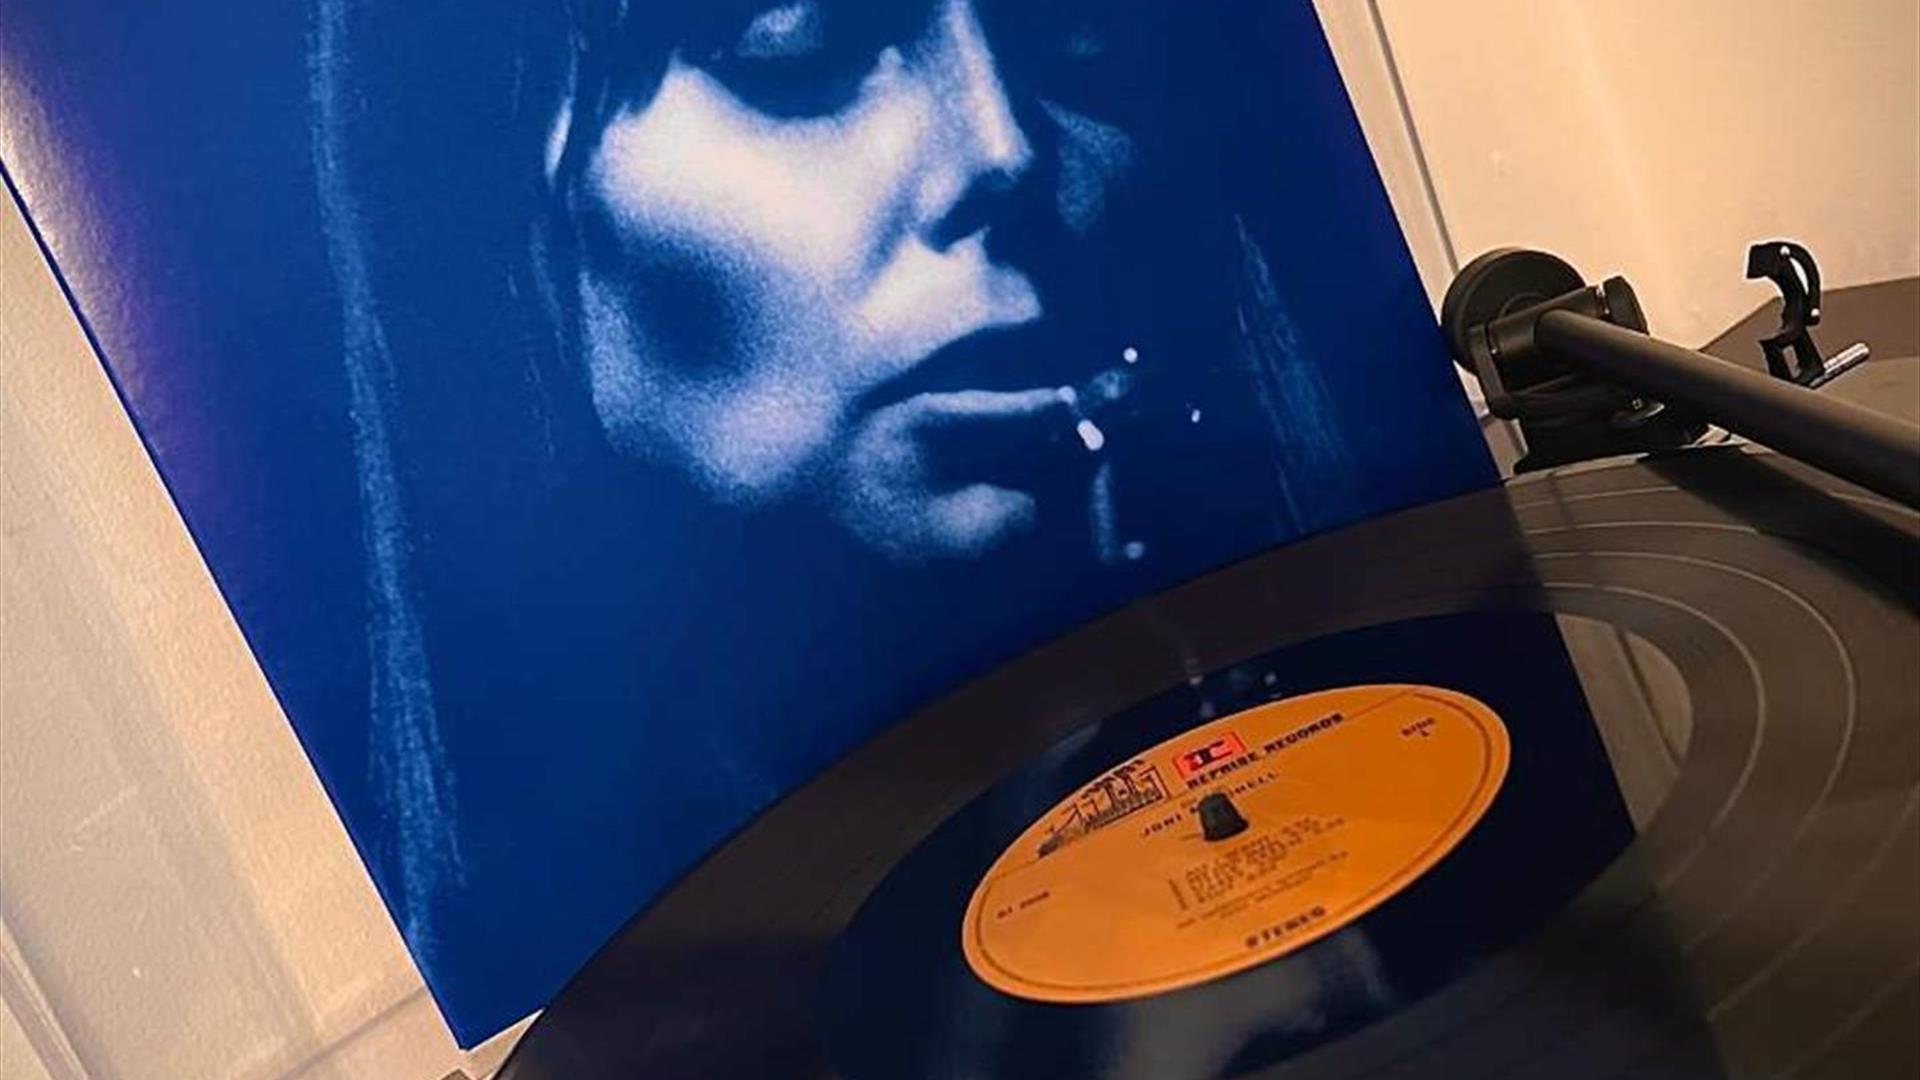 Picture of Joni Mitchell on the cover of her album in the background with a vinyl record on record player to the fore